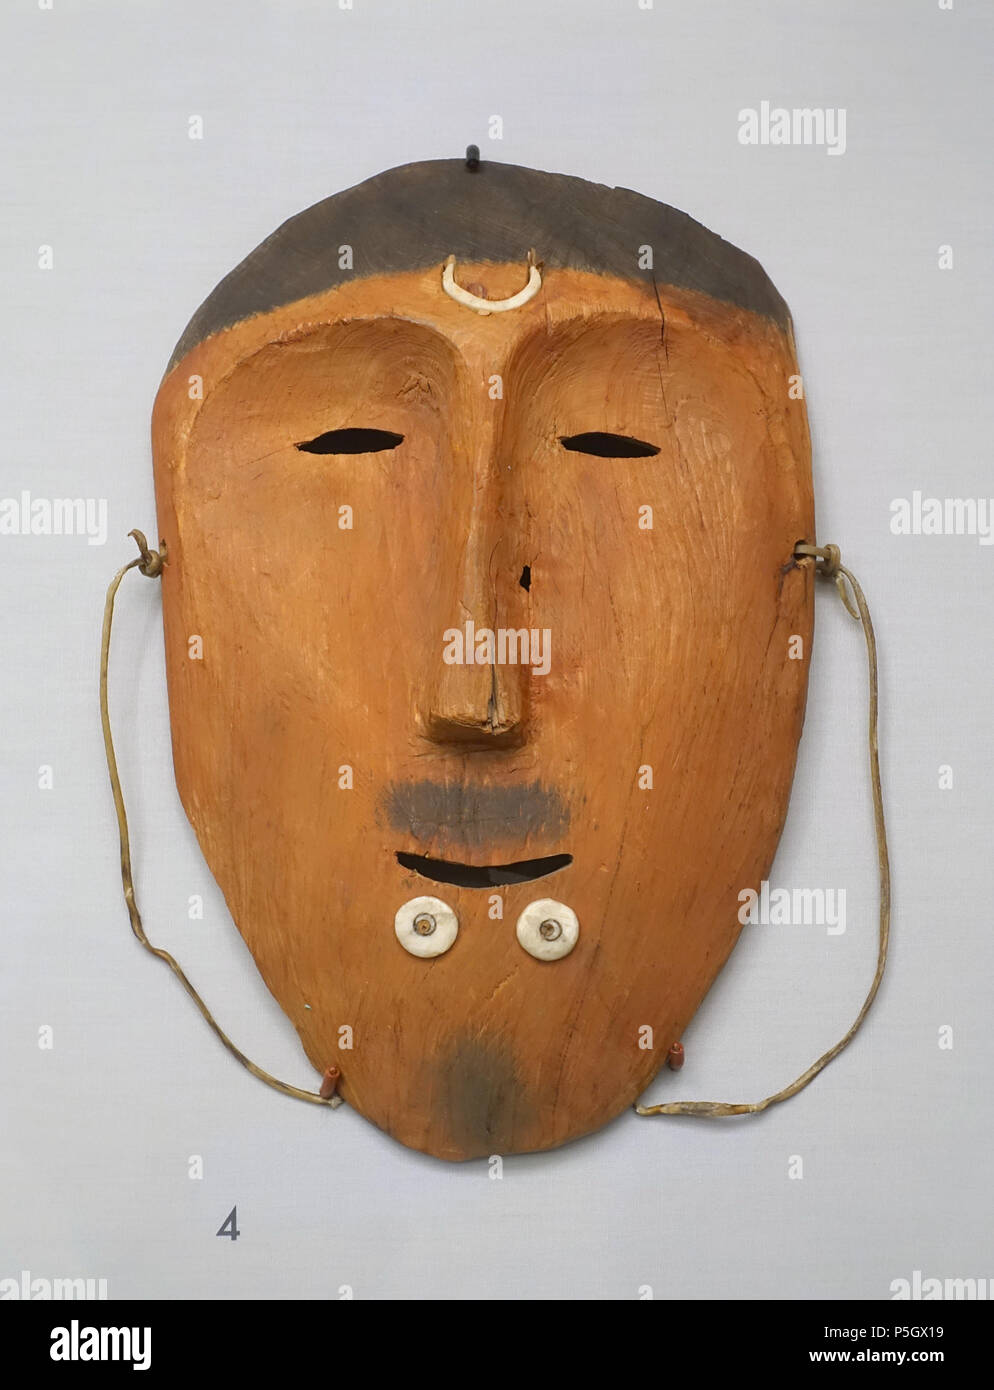 N/A. English: Exhibit from the Native American Collection, Peabody Museum, Harvard University, Cambridge, Massachusetts, USA. Photography was permitted without restriction; exhibit is old enough so that it is in the . 27 May 2017, 14:22:05. Daderot 409 Dance mask, Bering Straight Eskimo, acquired 1909 - Native American collection - Peabody Museum, Harvard University - DSC05859 Stock Photo